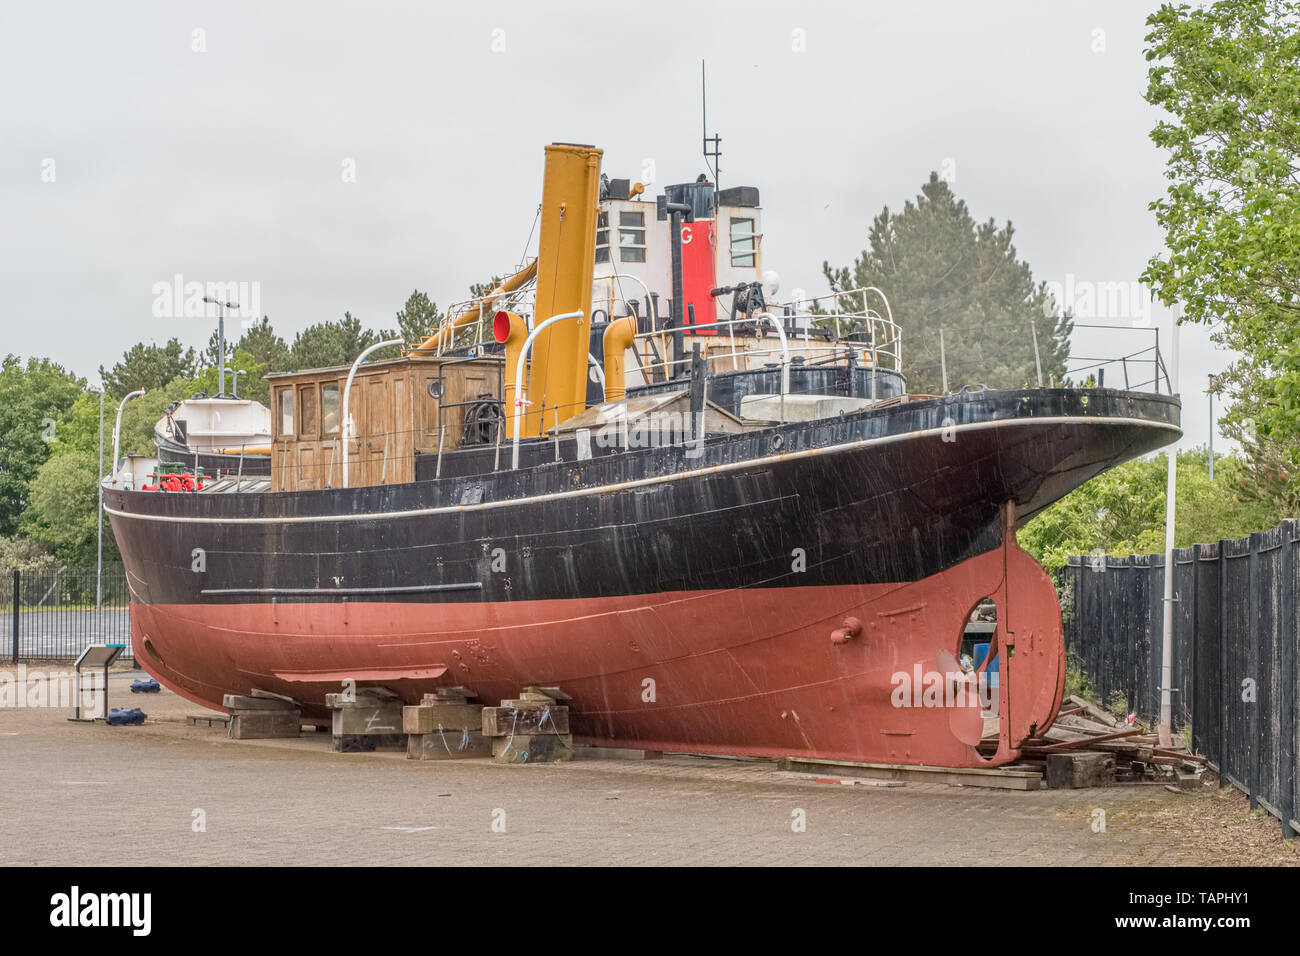 Irvine, Scotland, UK - May 25, 2019: Irvine Harbour Maritime Museum North Ayrshire Scotland Looking Over some ancient maritime puffers that are berthe Stock Photo